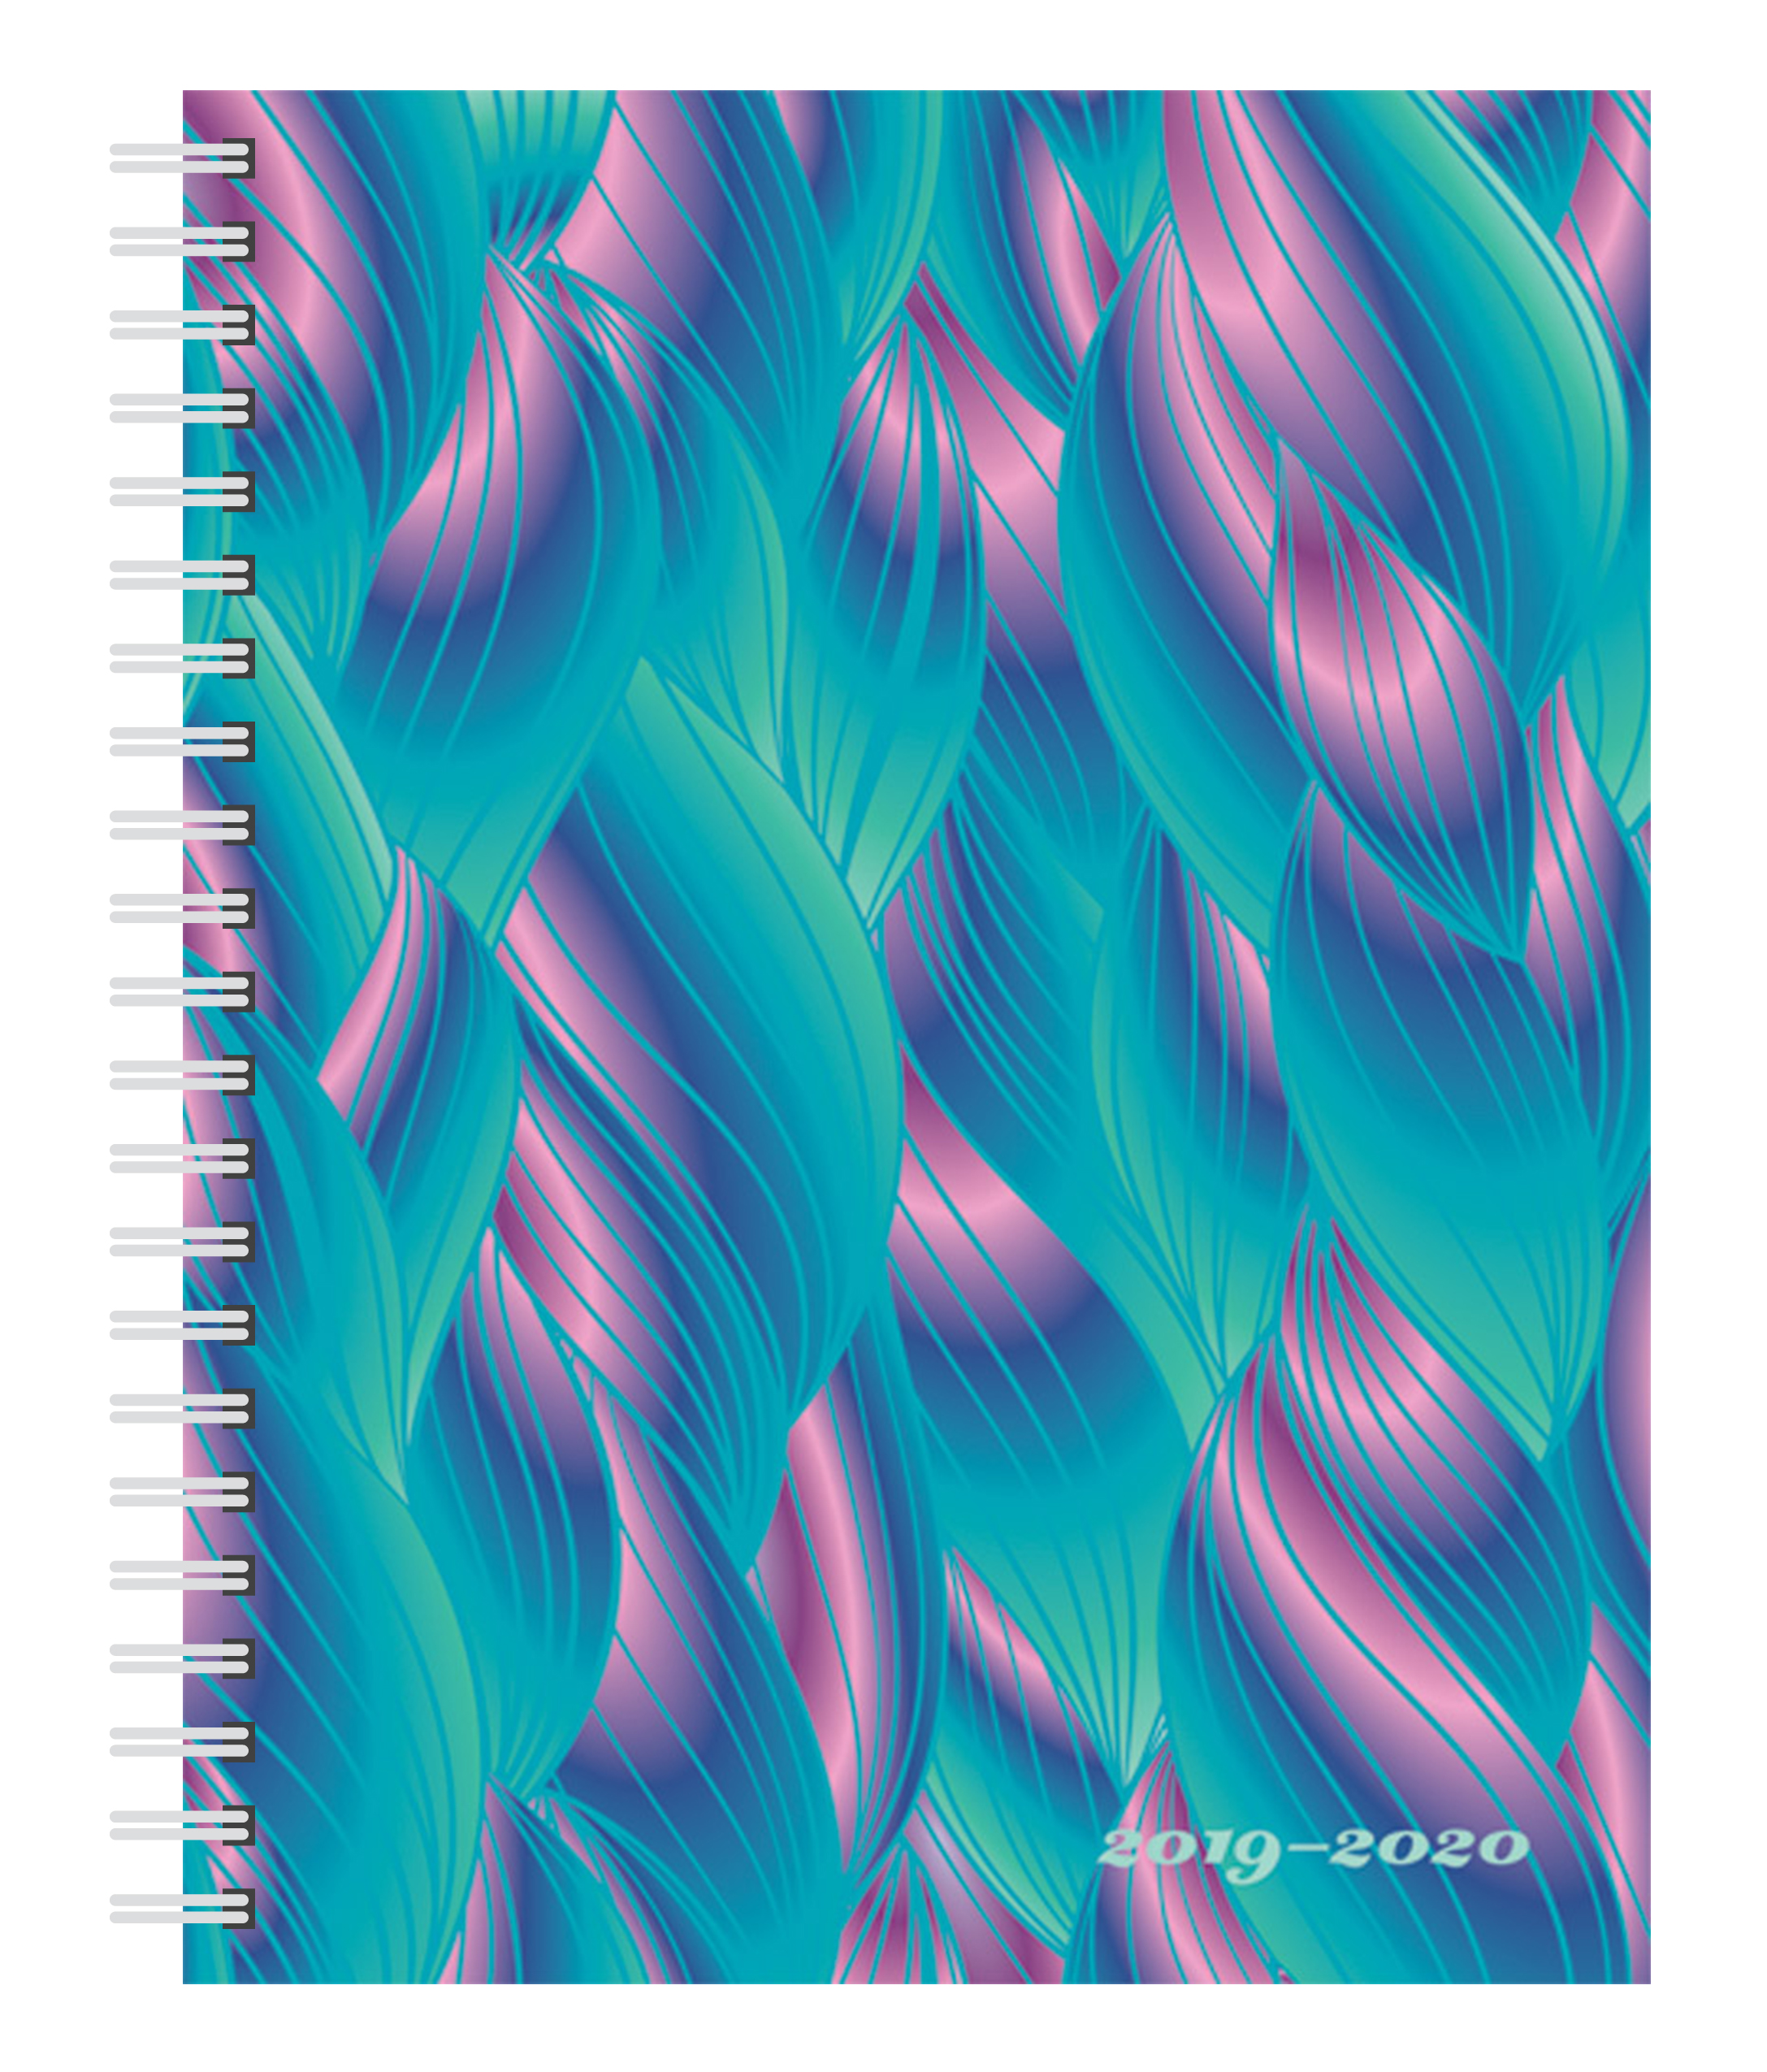 Ariel 2020 6 x 7.75 Inch Weekly 18 Months Desk Planner by Plato, Planning Stationery